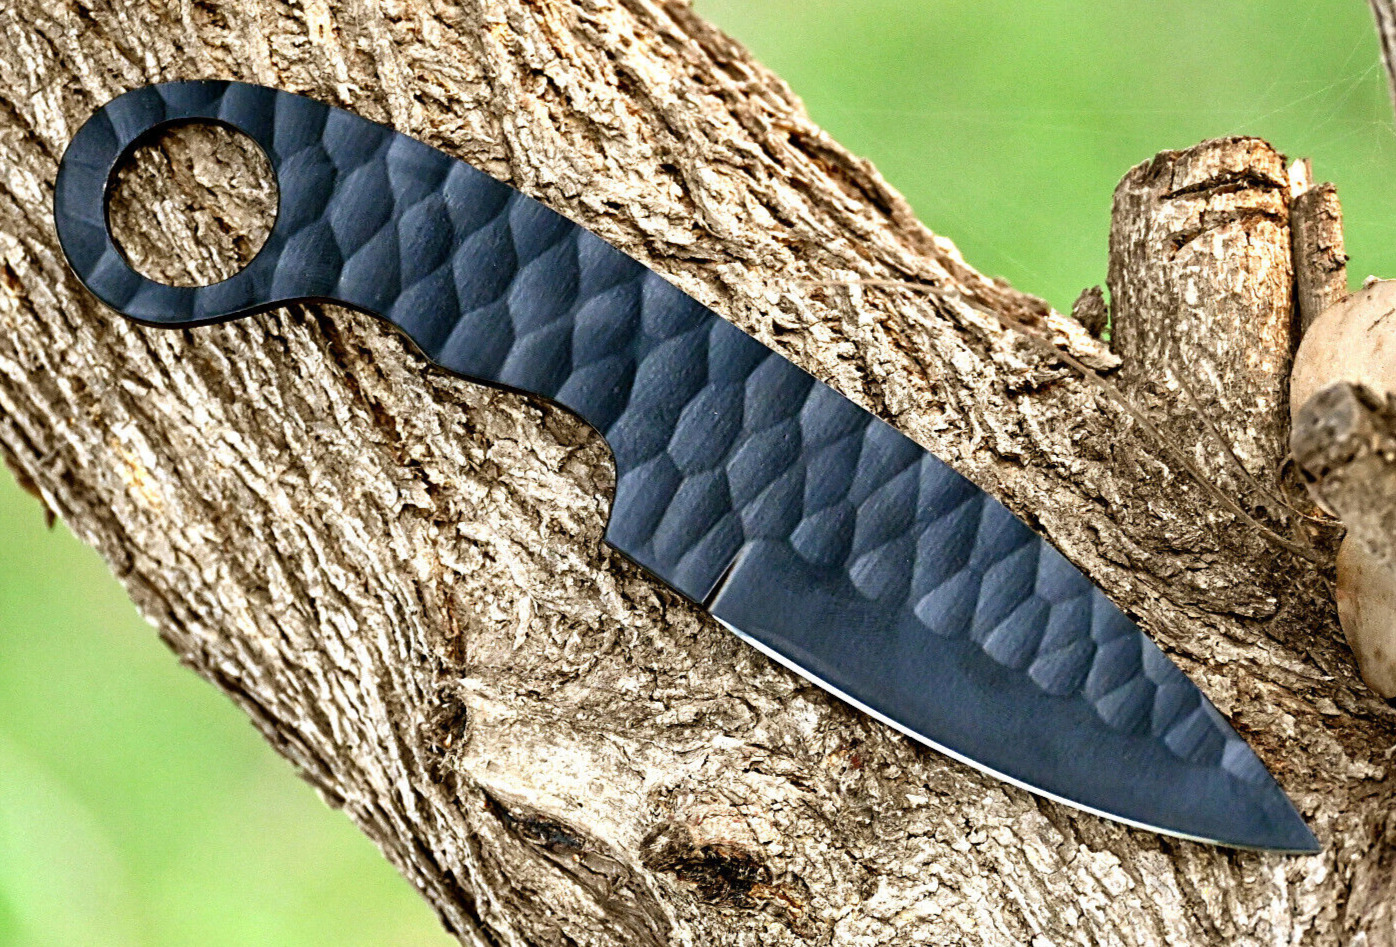 Custom Made Tactical Hunting Knife Blank Blade -Forged Carbon Steel Blade 2715